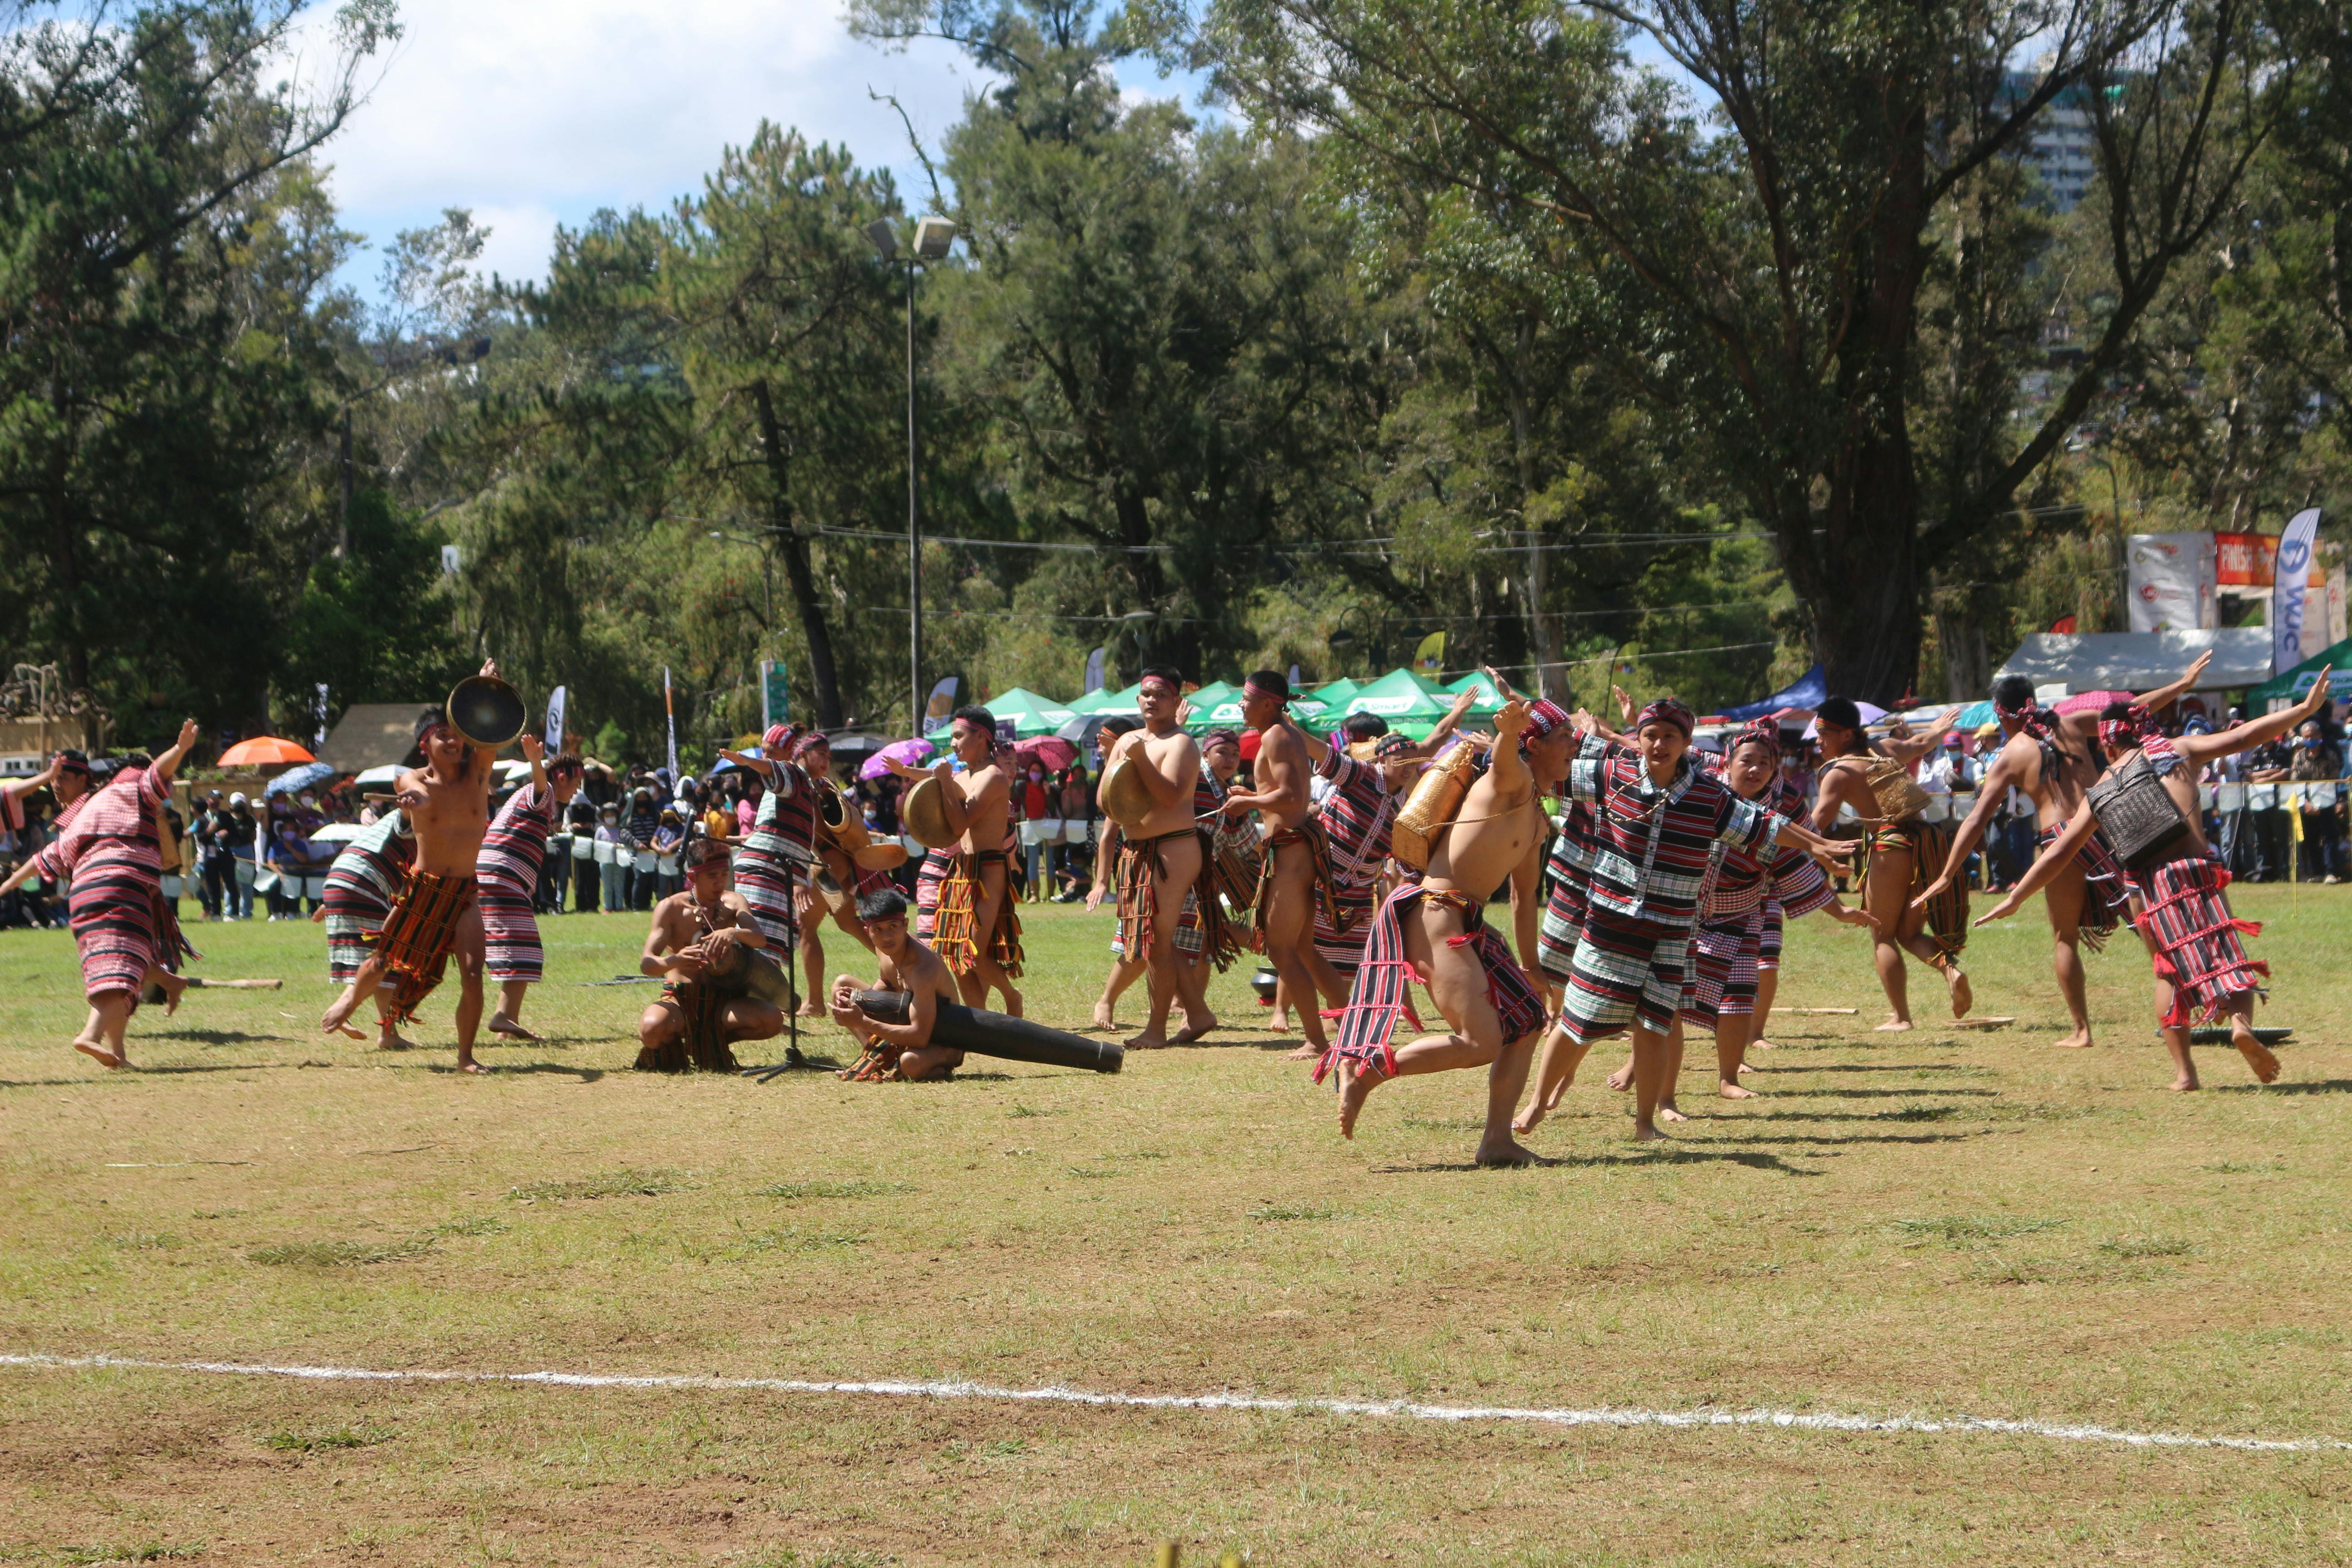 dancers in traditional clothing dancing on a grass field